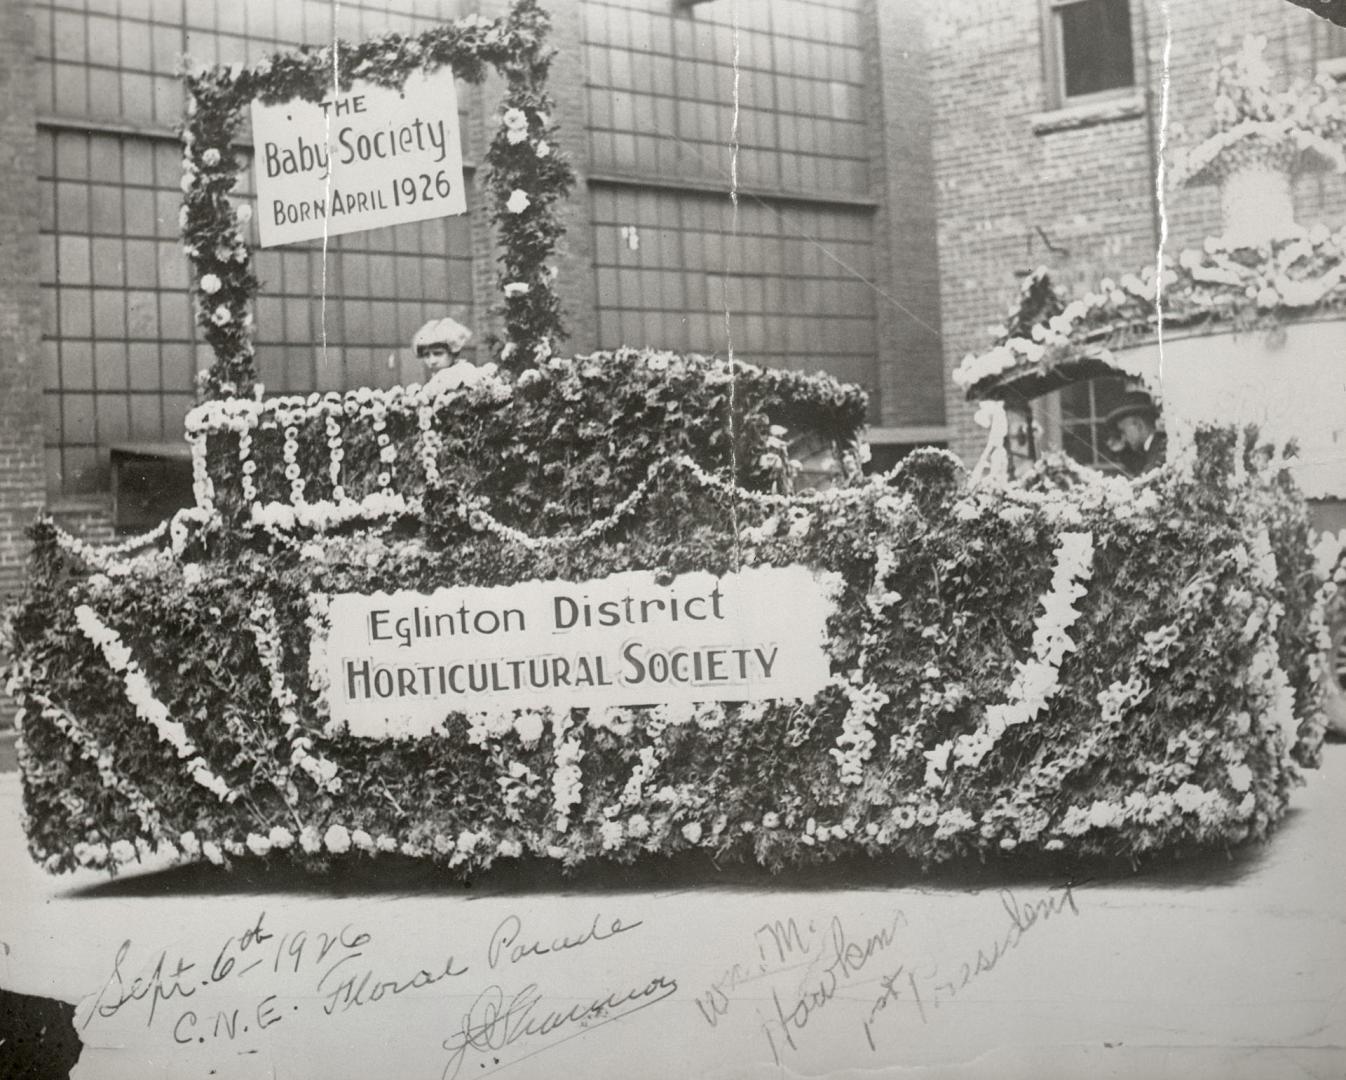 C.N.E. Floral Parade, 1926, Eglinton District Horticultural Society float